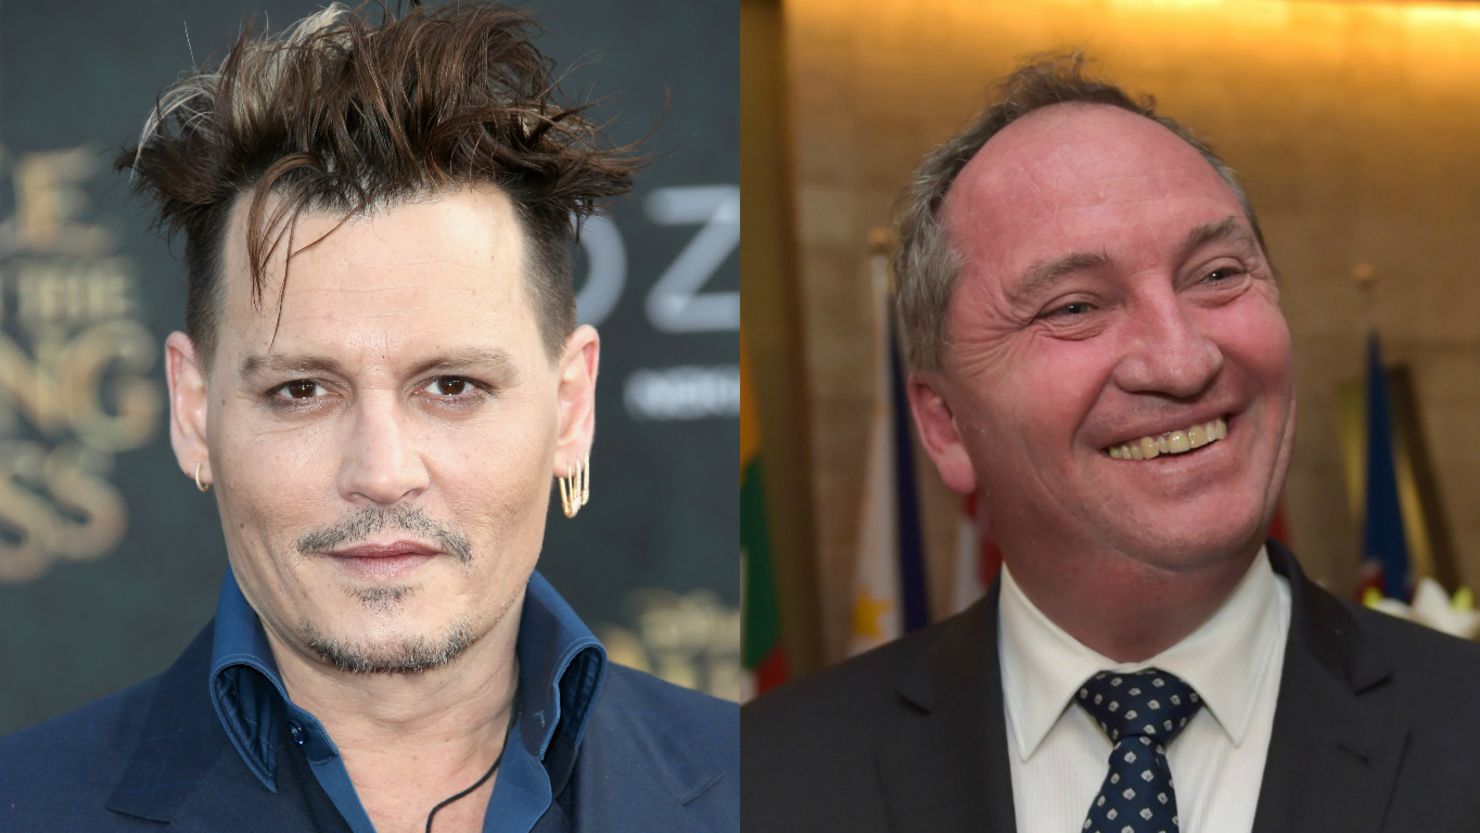 Actor Johnny Depp has directed fresh insults at Australia's Deputy Prime Minister Barnaby Joyce.